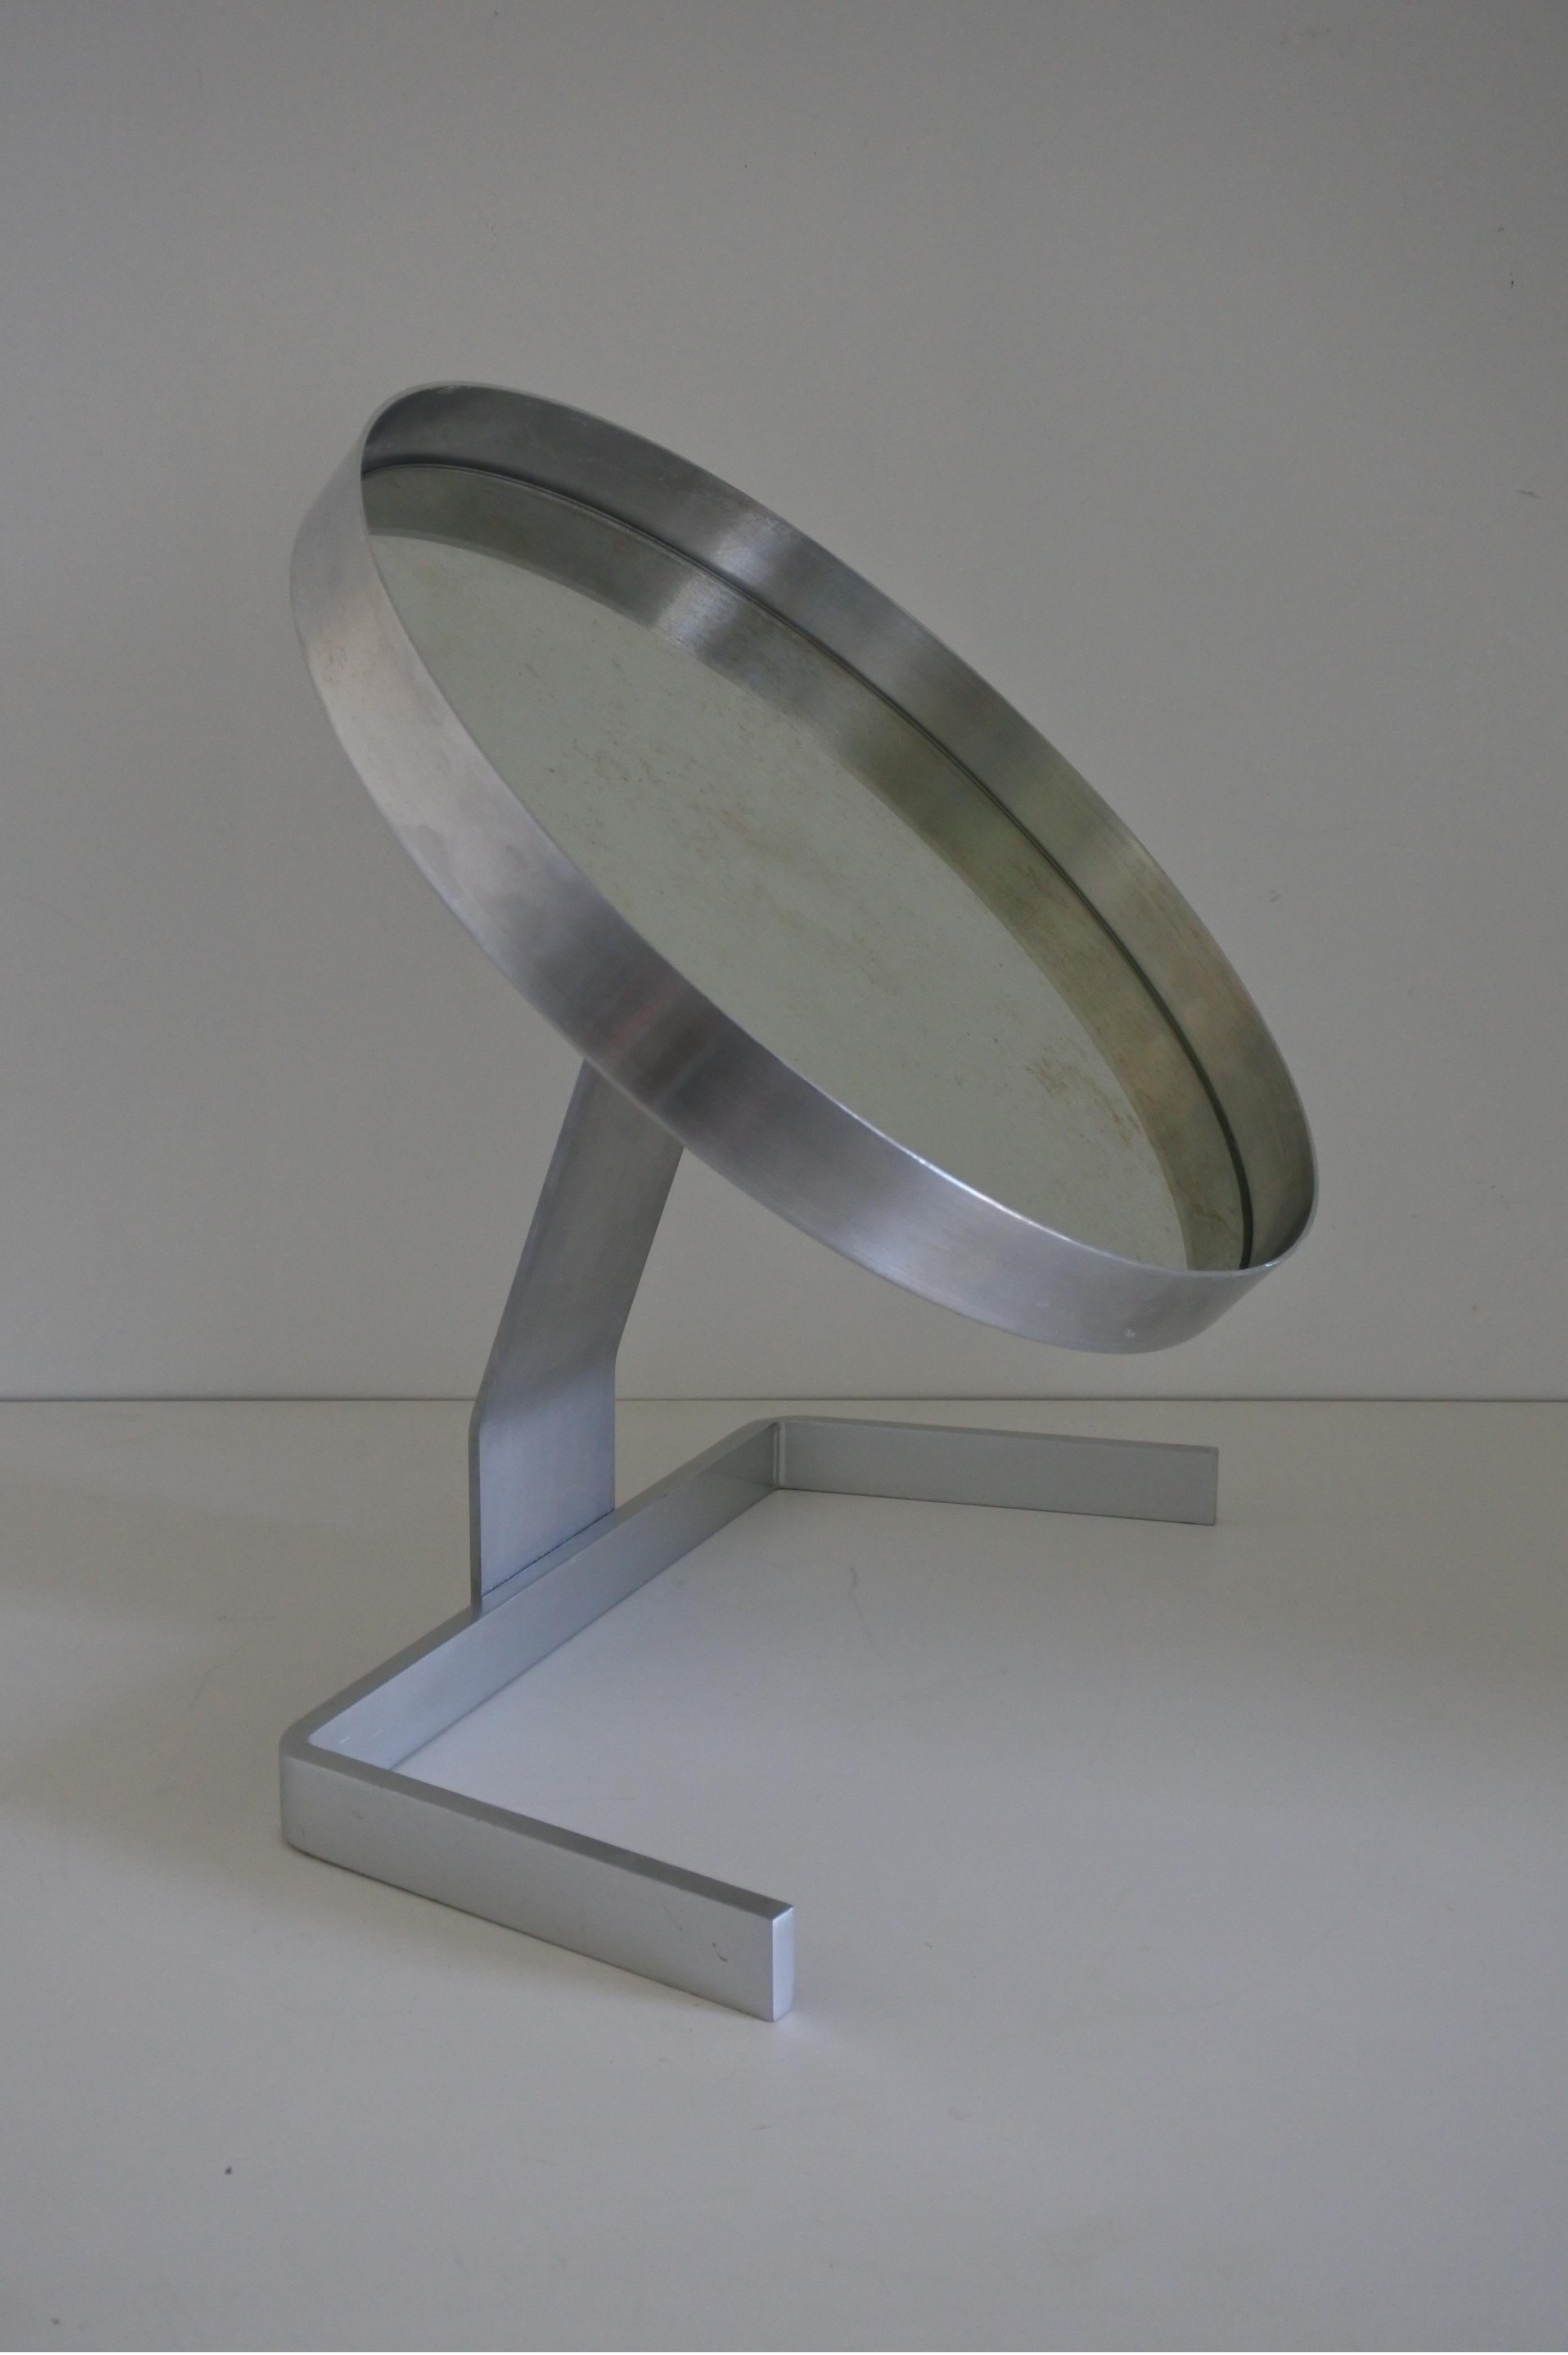 Modernist vanity or table mirror by French designer Pierre Vandel.
Brushed and polished aluminum.
Made in France in the late 1960s, early 1970s.
Can be orientated up and down.
Diameter of the mirror 40 cm.

 